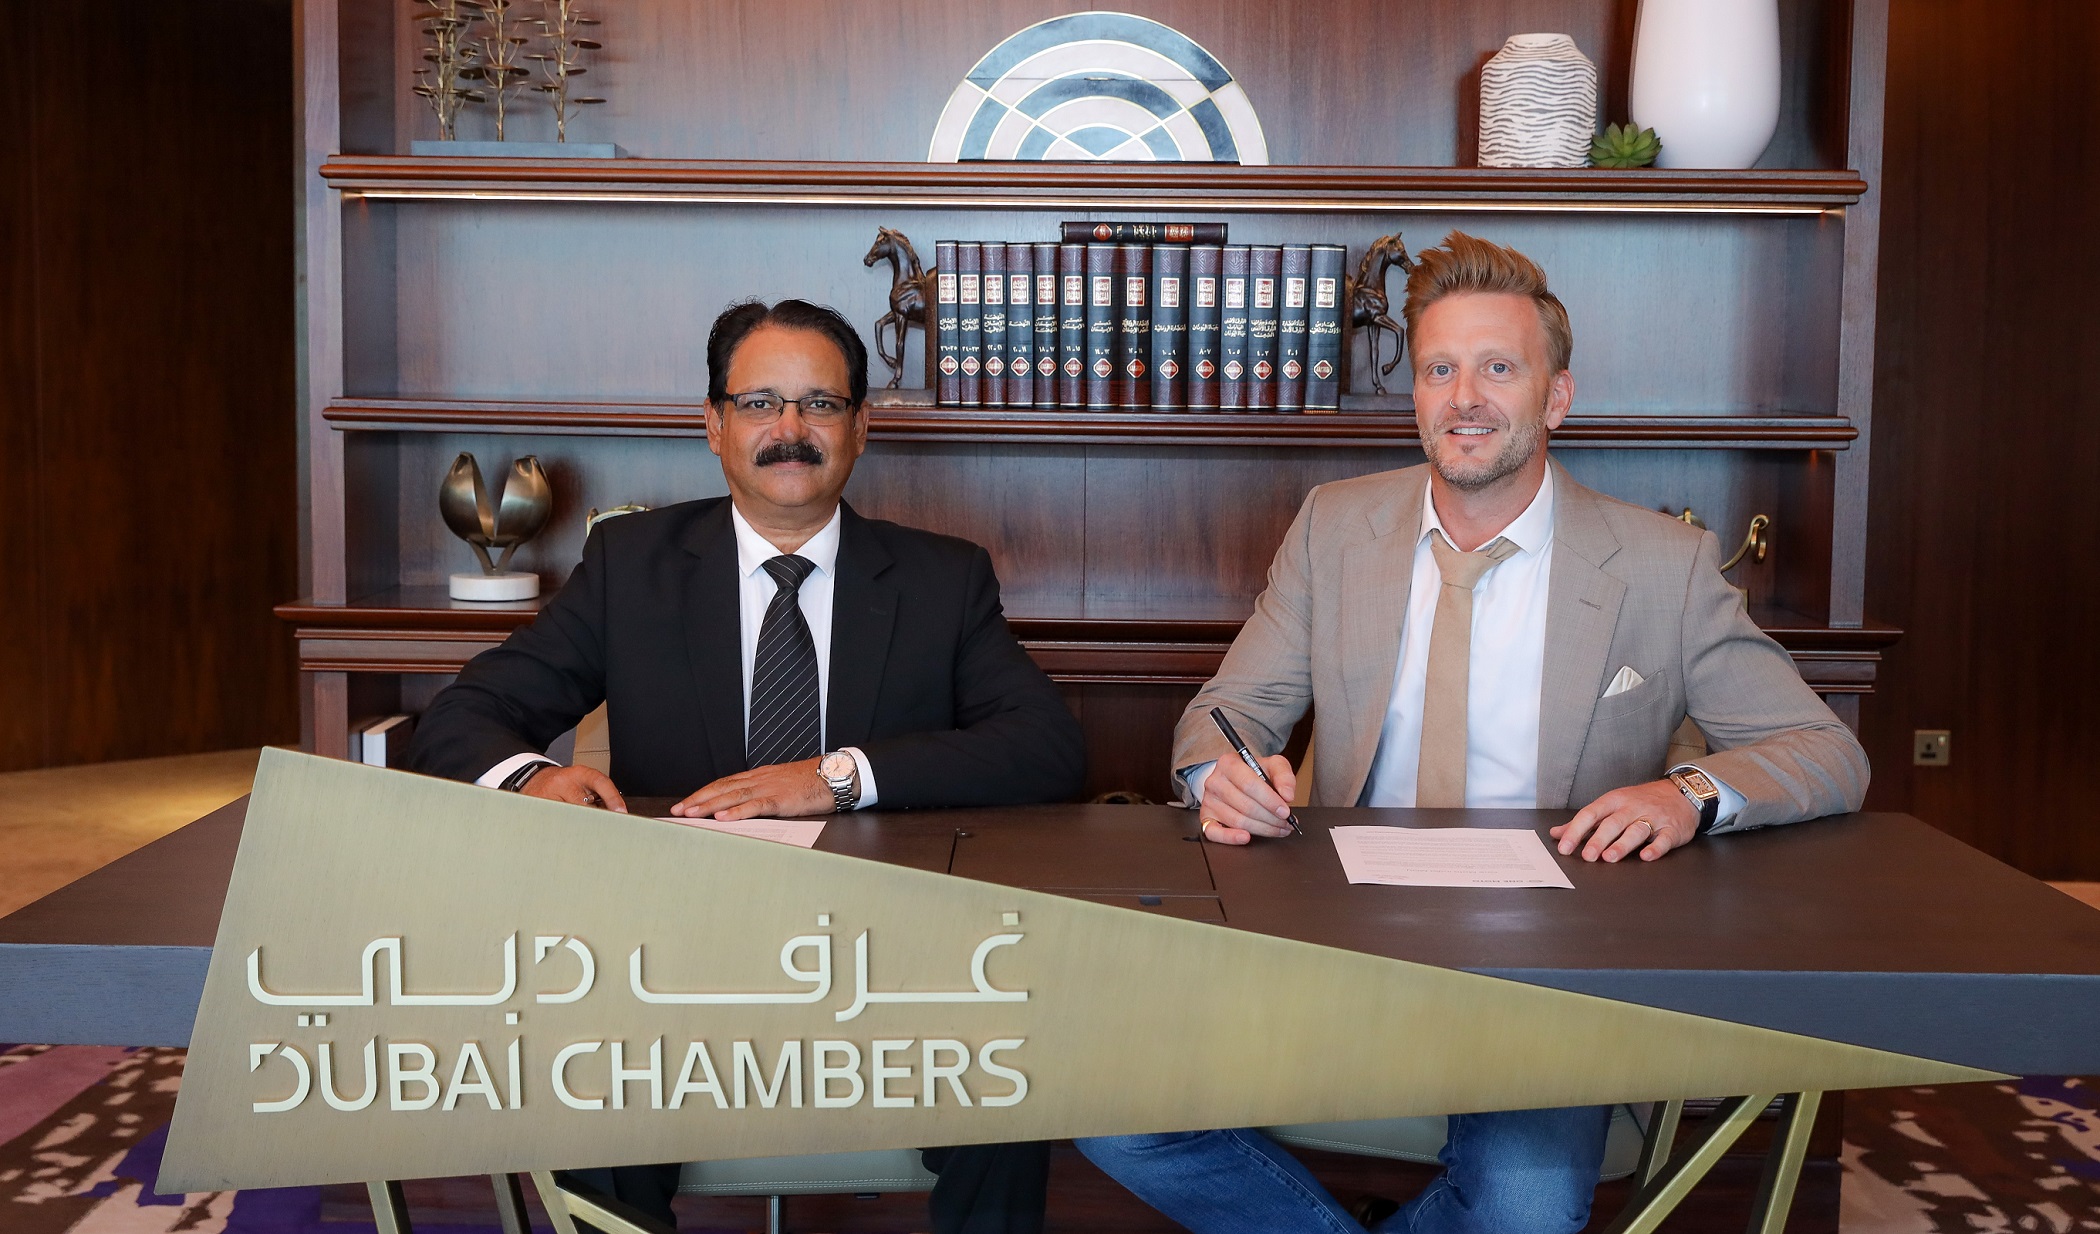 Dubai International Chamber supports the expansion of two companies from Dubai in the global electric vehicles market